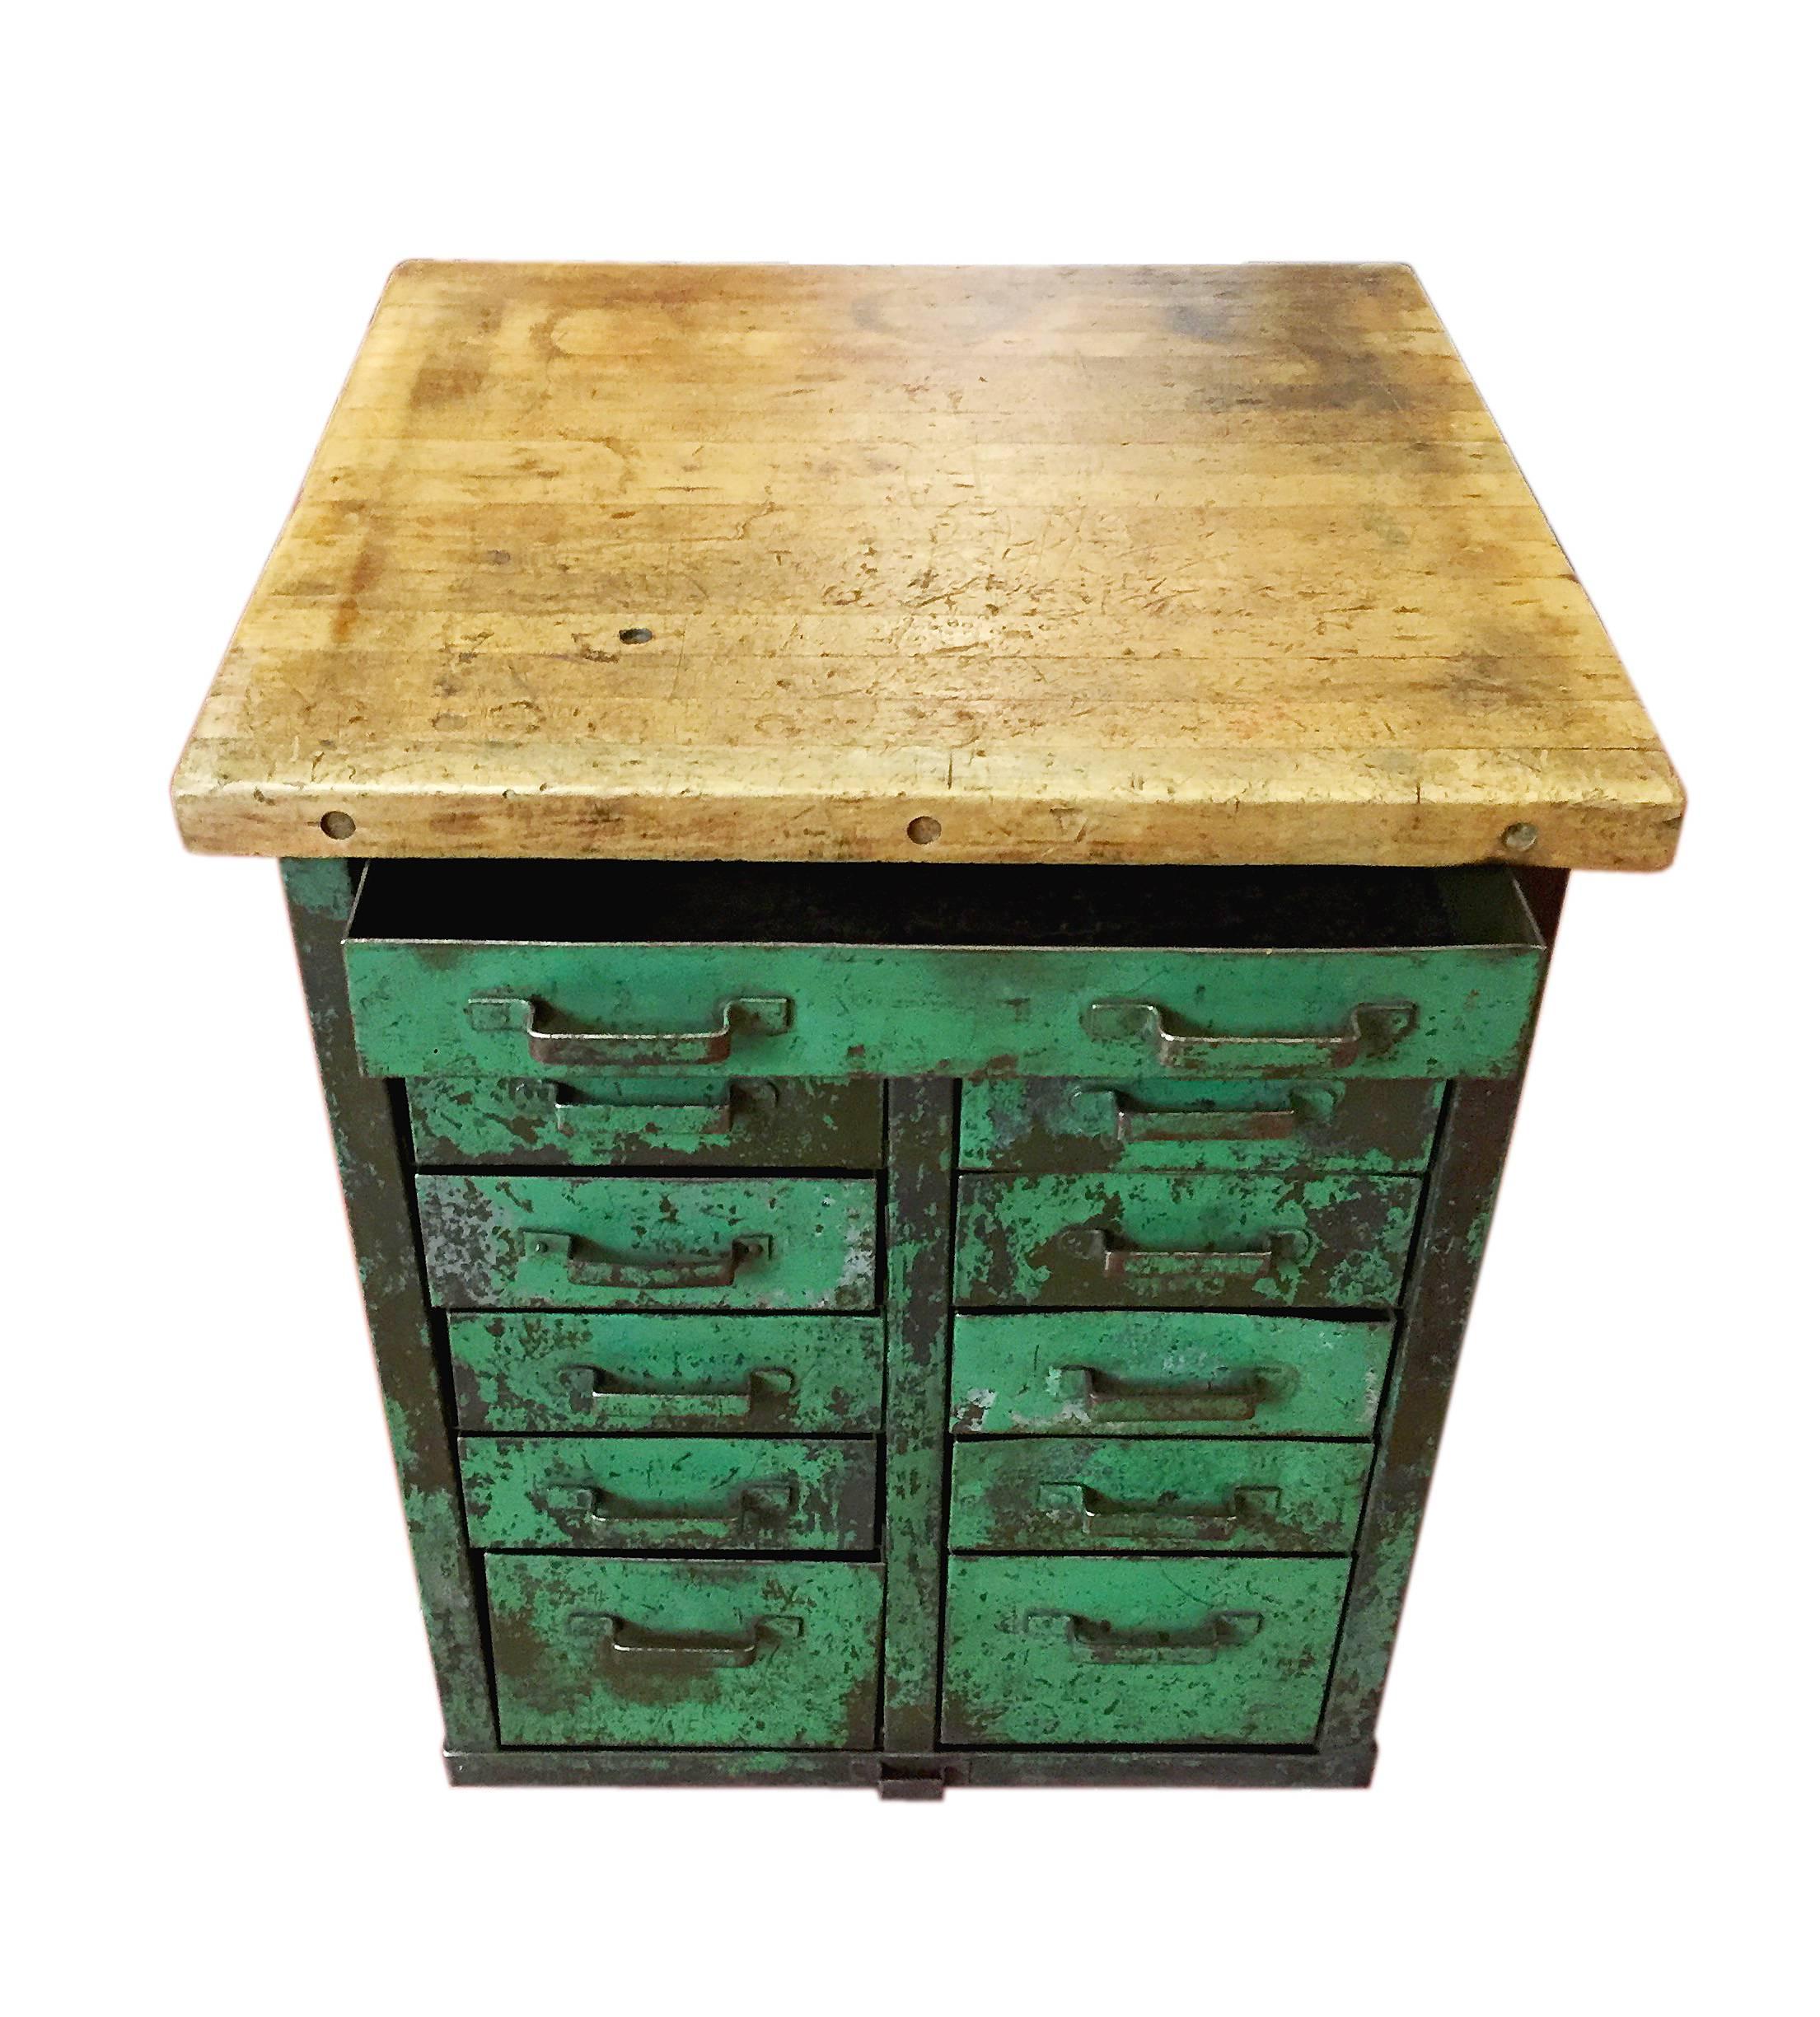 A pair of French Industrial square chests of drawers, made out of the painted iron sheet of green color with laminated wood shelf plank and four wheels. Wheels added recently. Two available, 2.300,00 Euro each one. France, 1920.